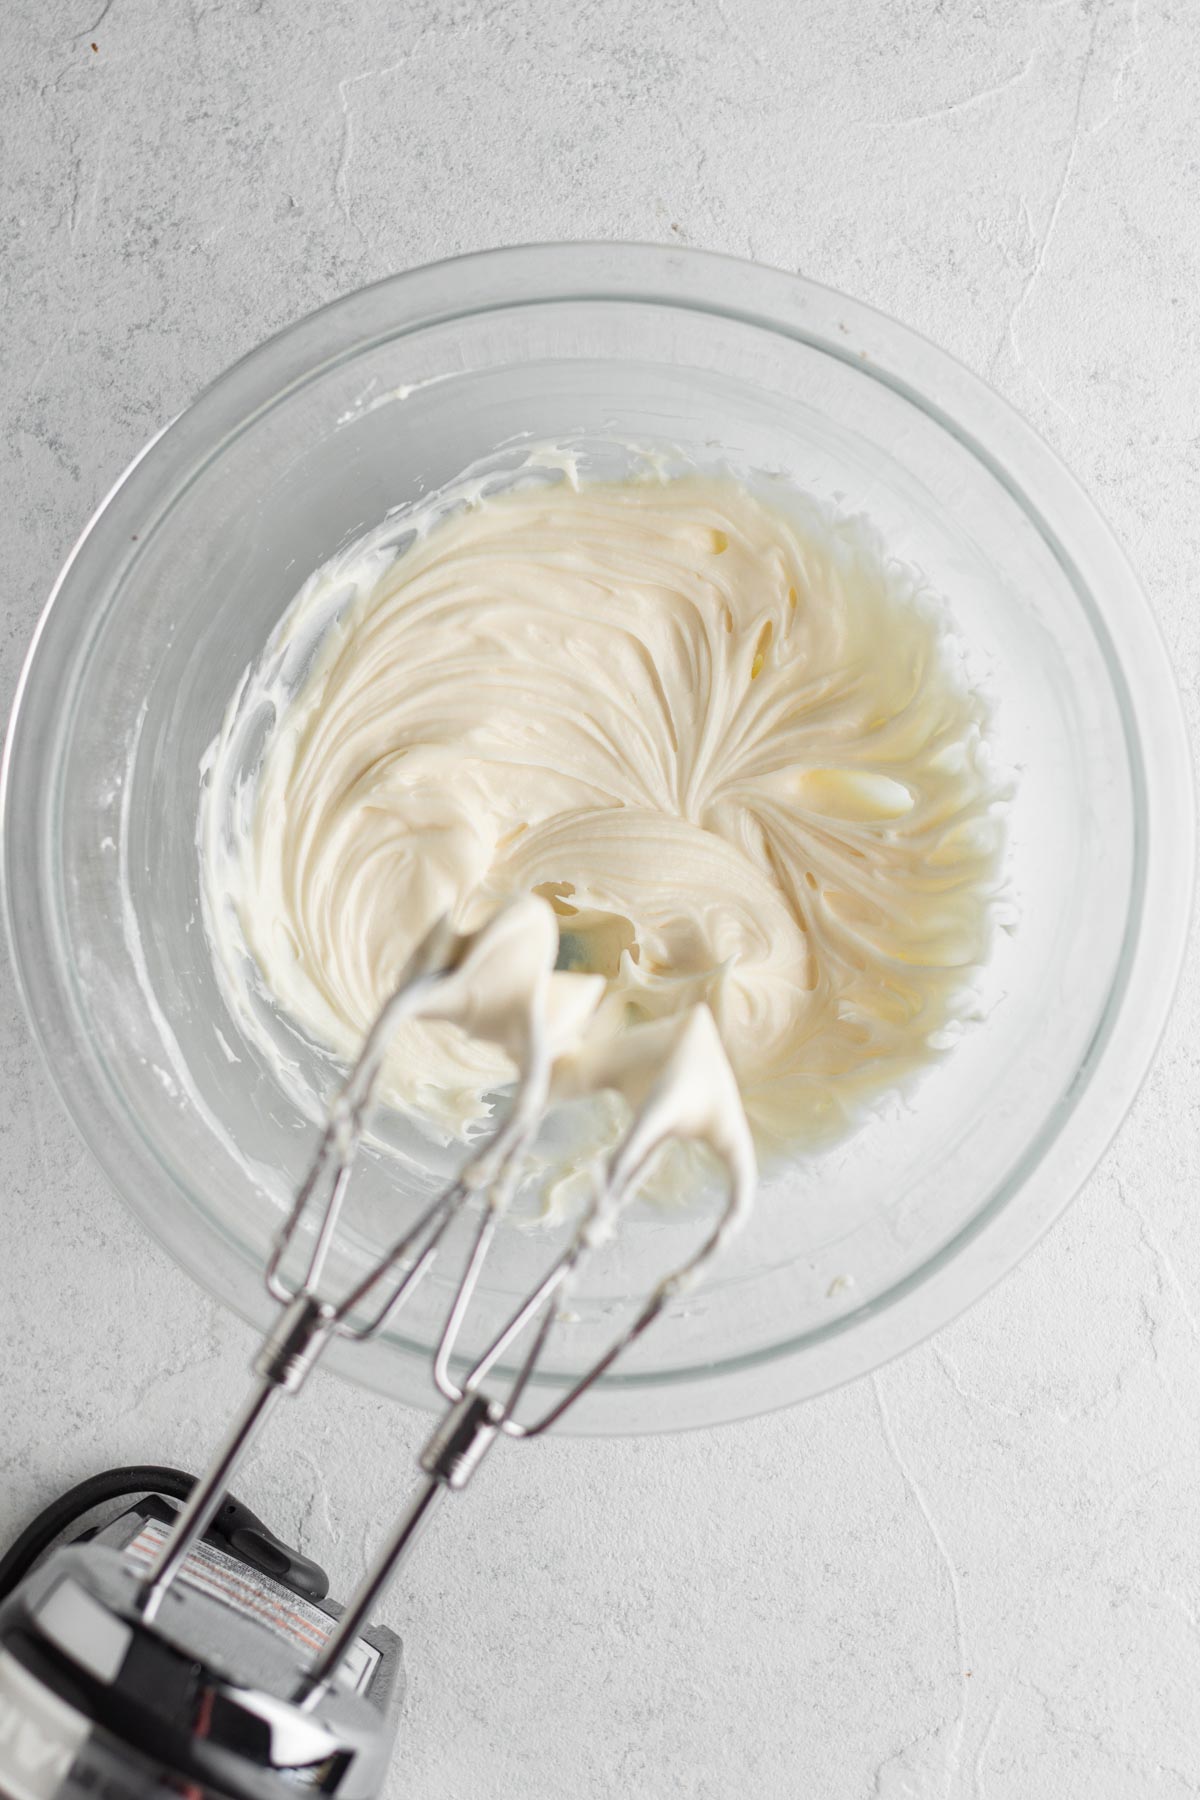 Cream cheese frosting in a glass mixing bowl with an electric hand mixer.